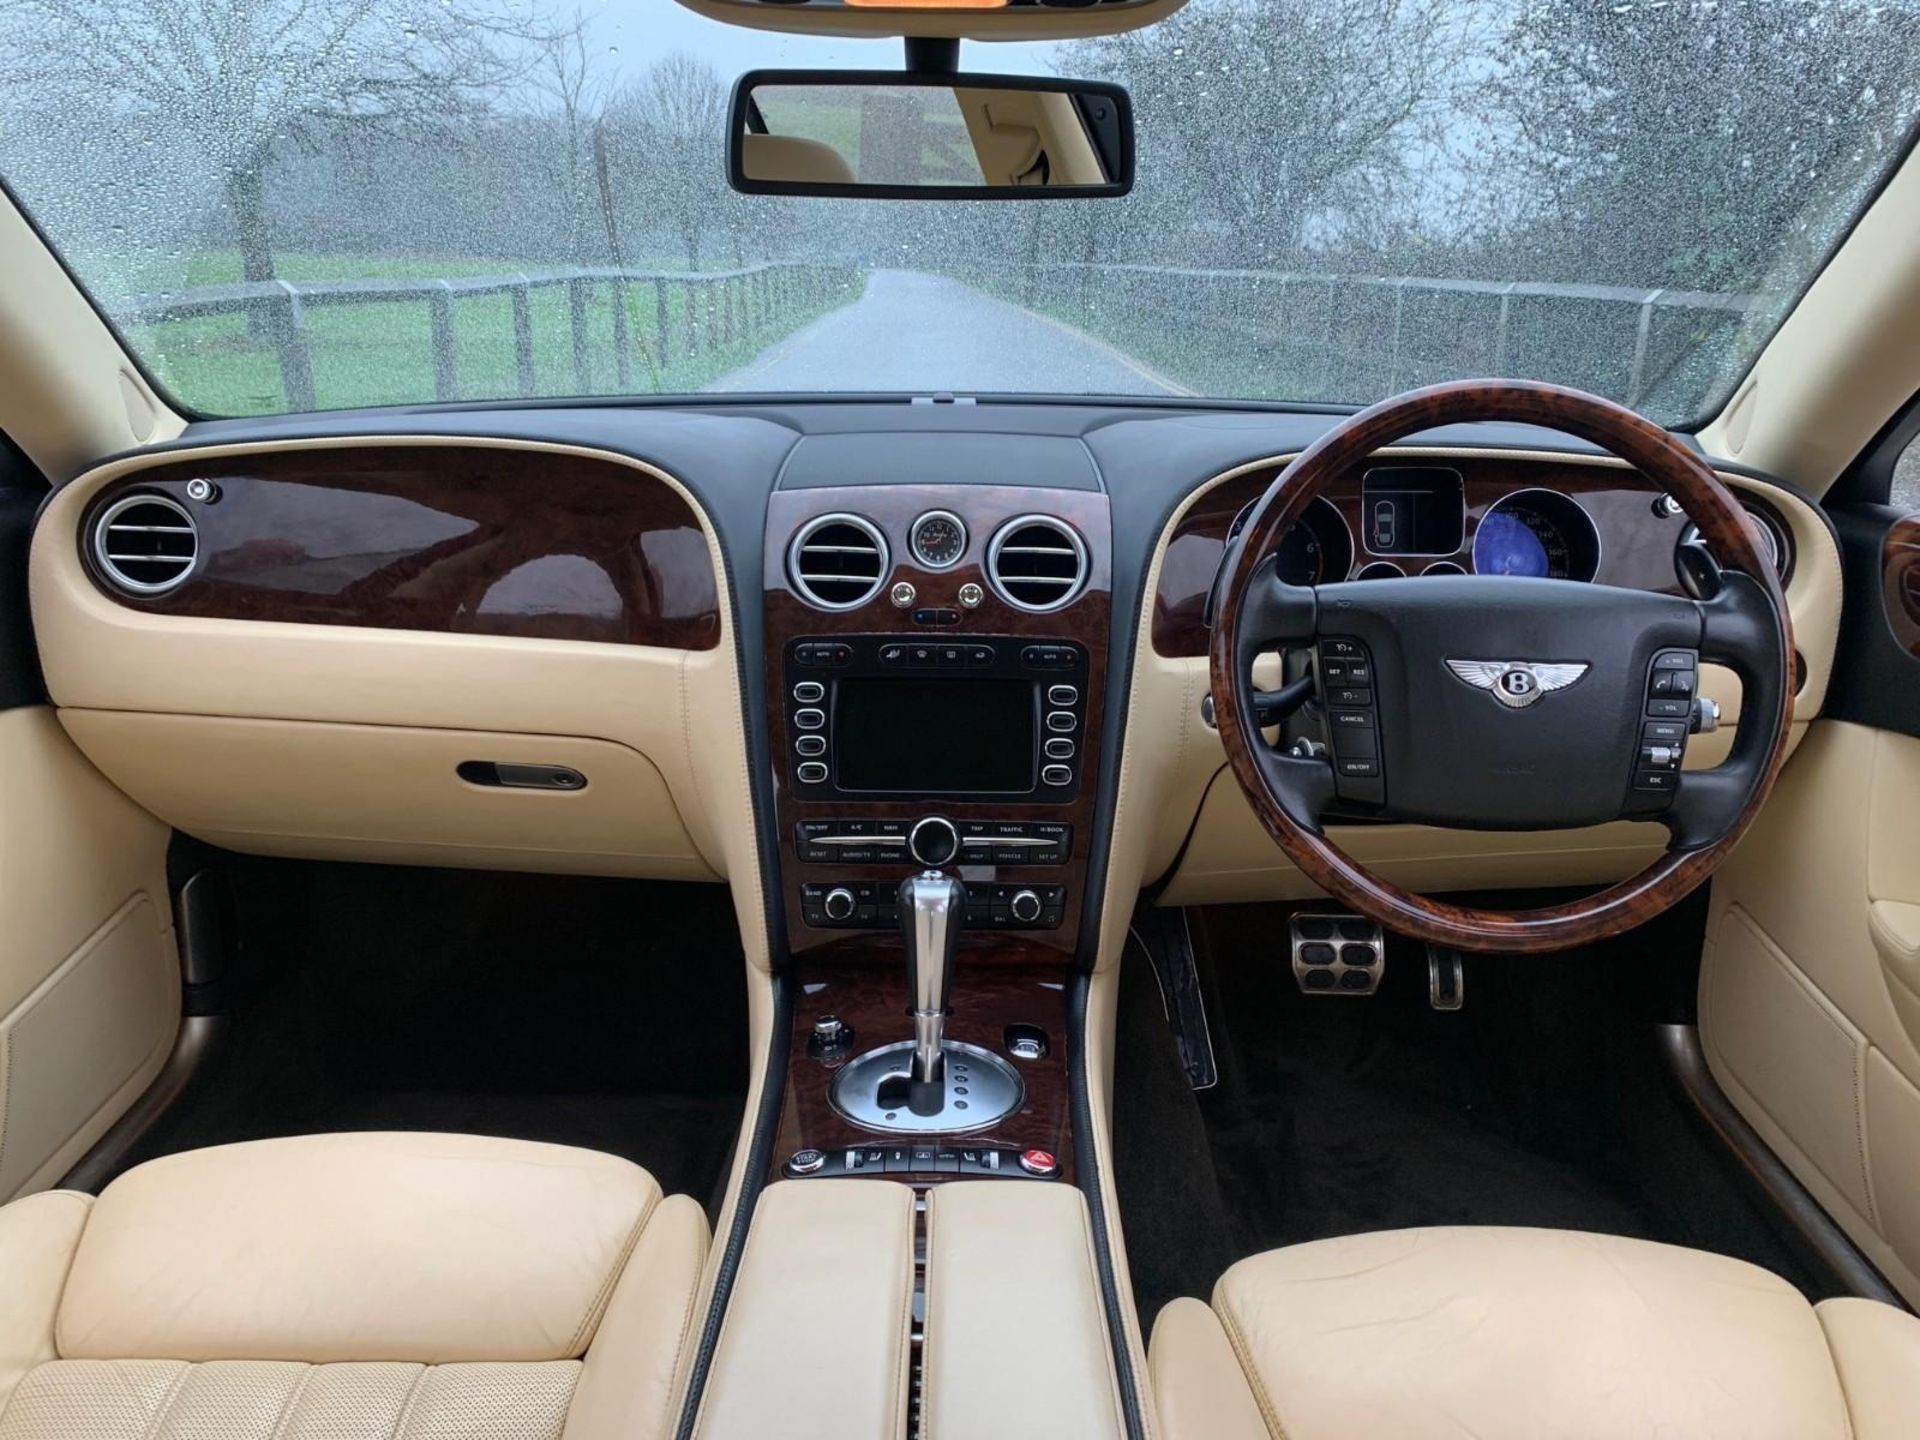 2005 BENTLEY CONTINENTAL FLYING SPUR 6.0 (552 BHP) 4X4 TWIN TURBO AUTO FULL BENTLEY SERVICE HISTORY - Image 12 of 12